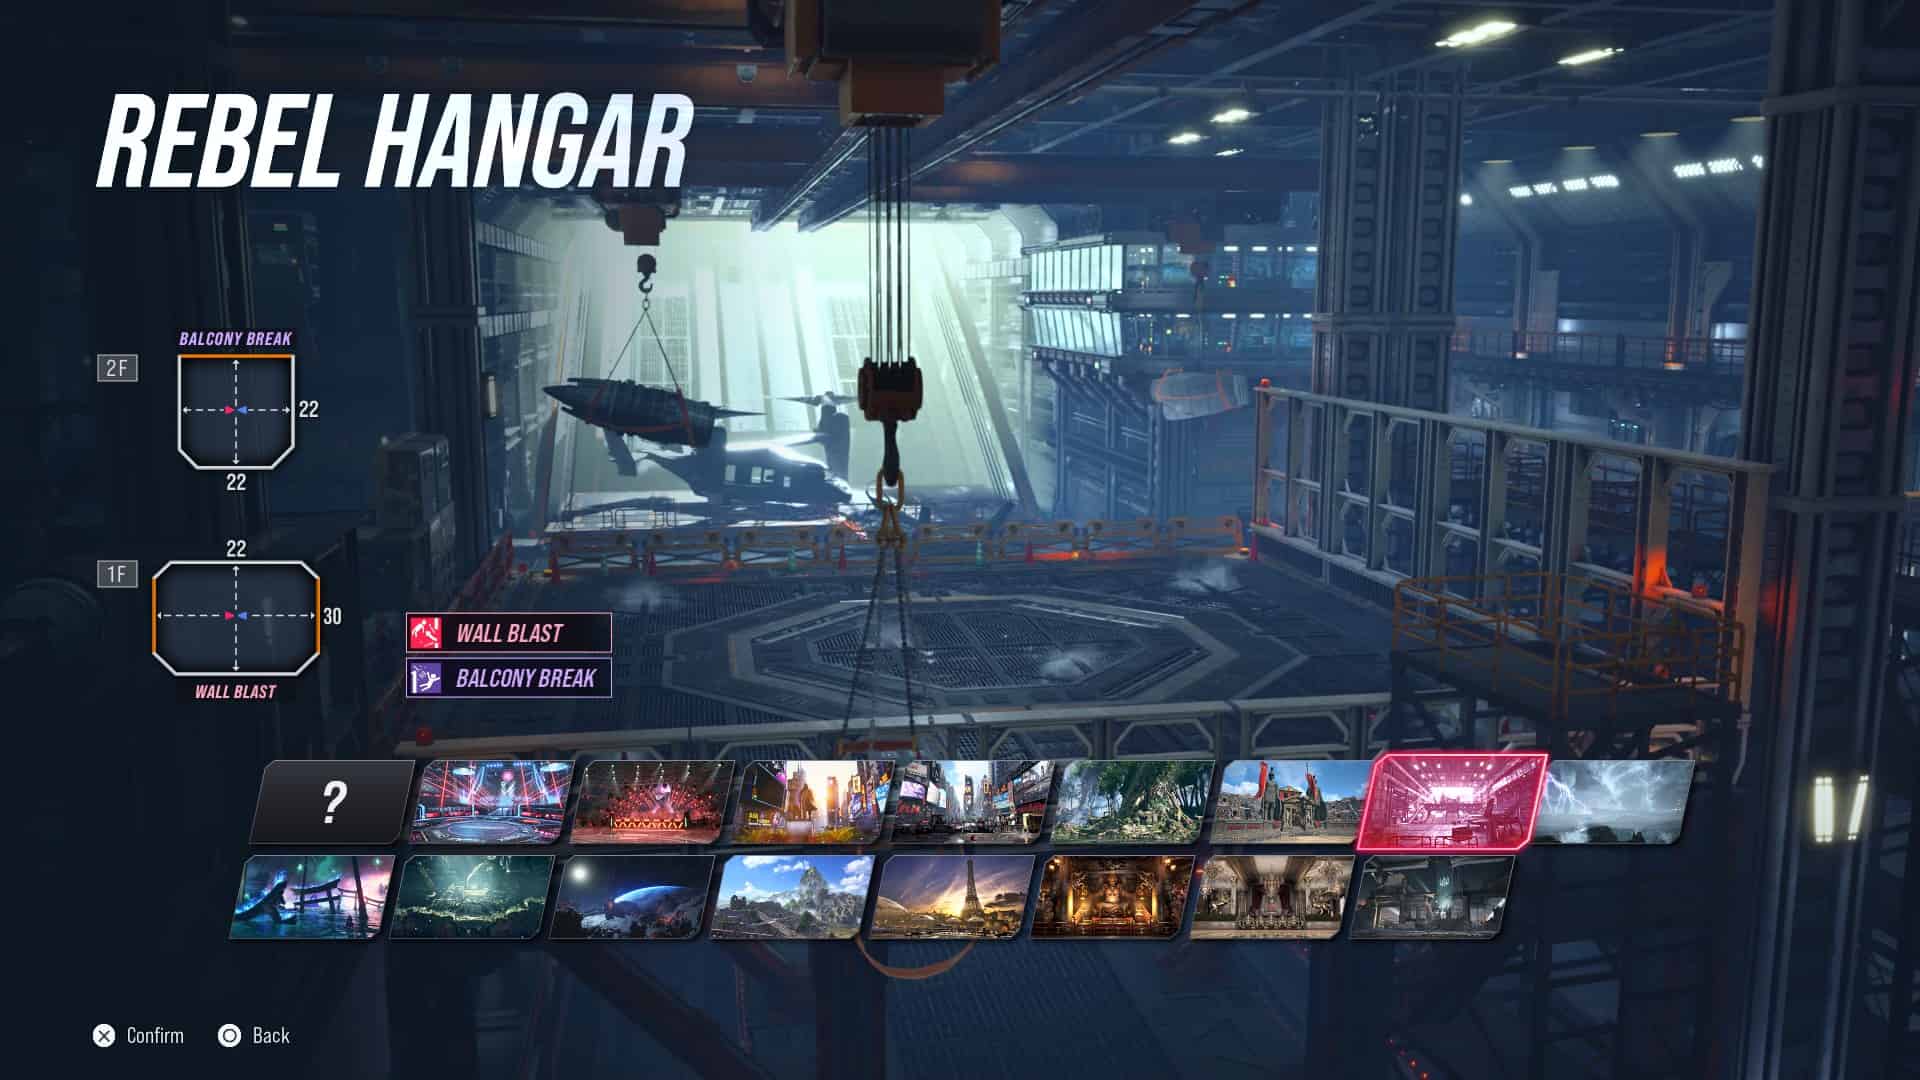 Tekken 8 stages: The Rebel Hangar stage in the stage select screen